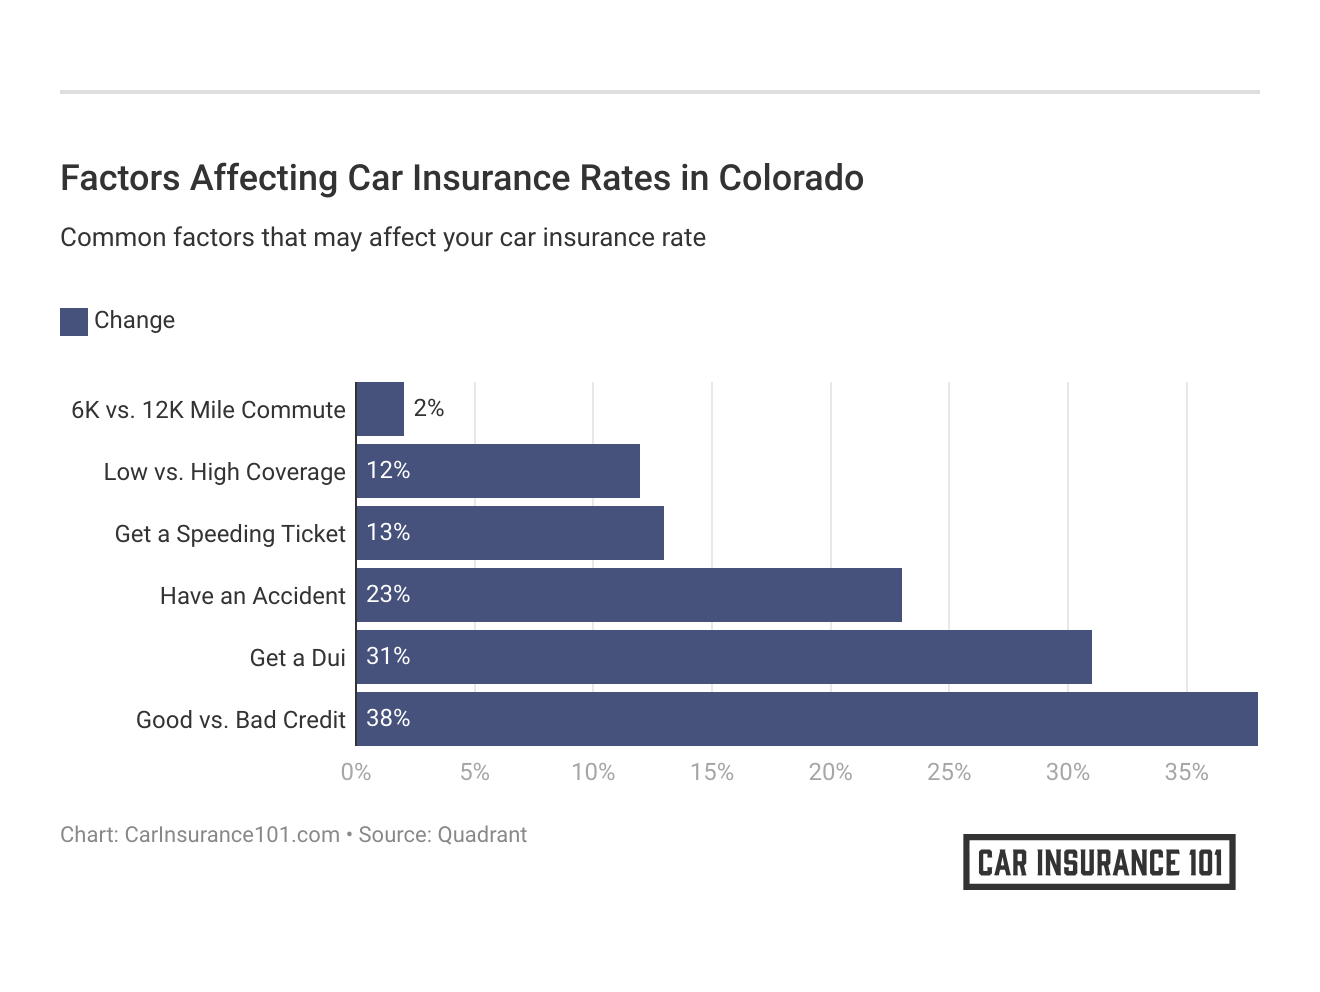 <h3>Factors Affecting Car Insurance Rates in Colorado</h3>